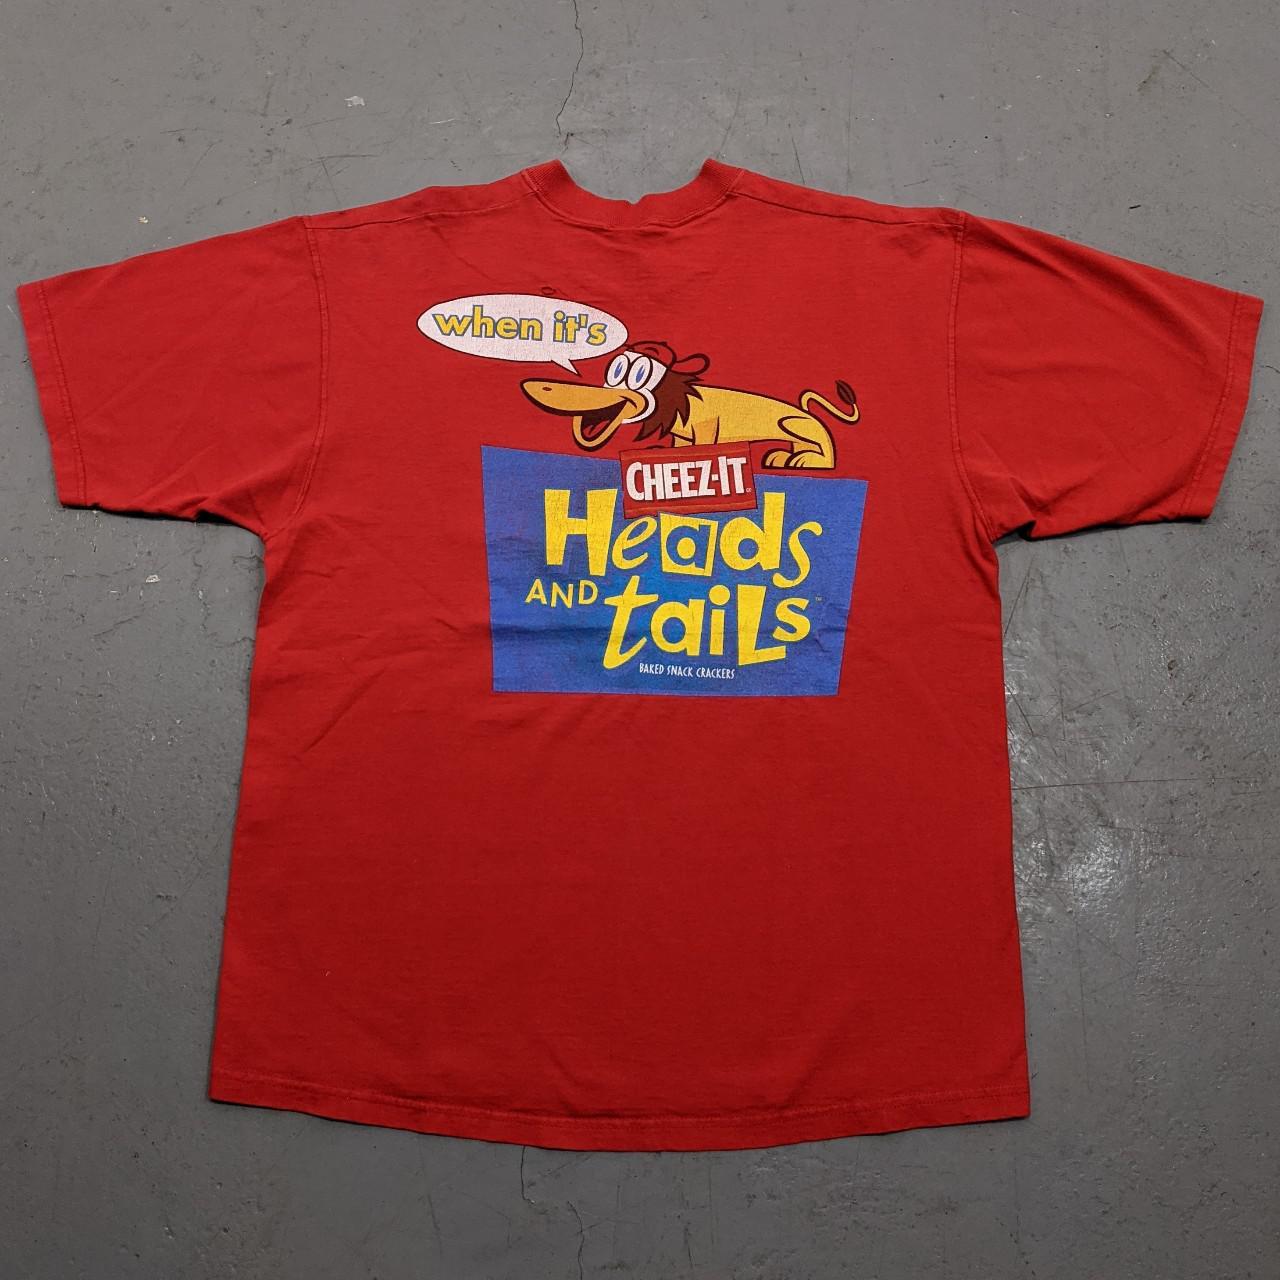 American Vintage Men's Red and Yellow T-shirt (2)